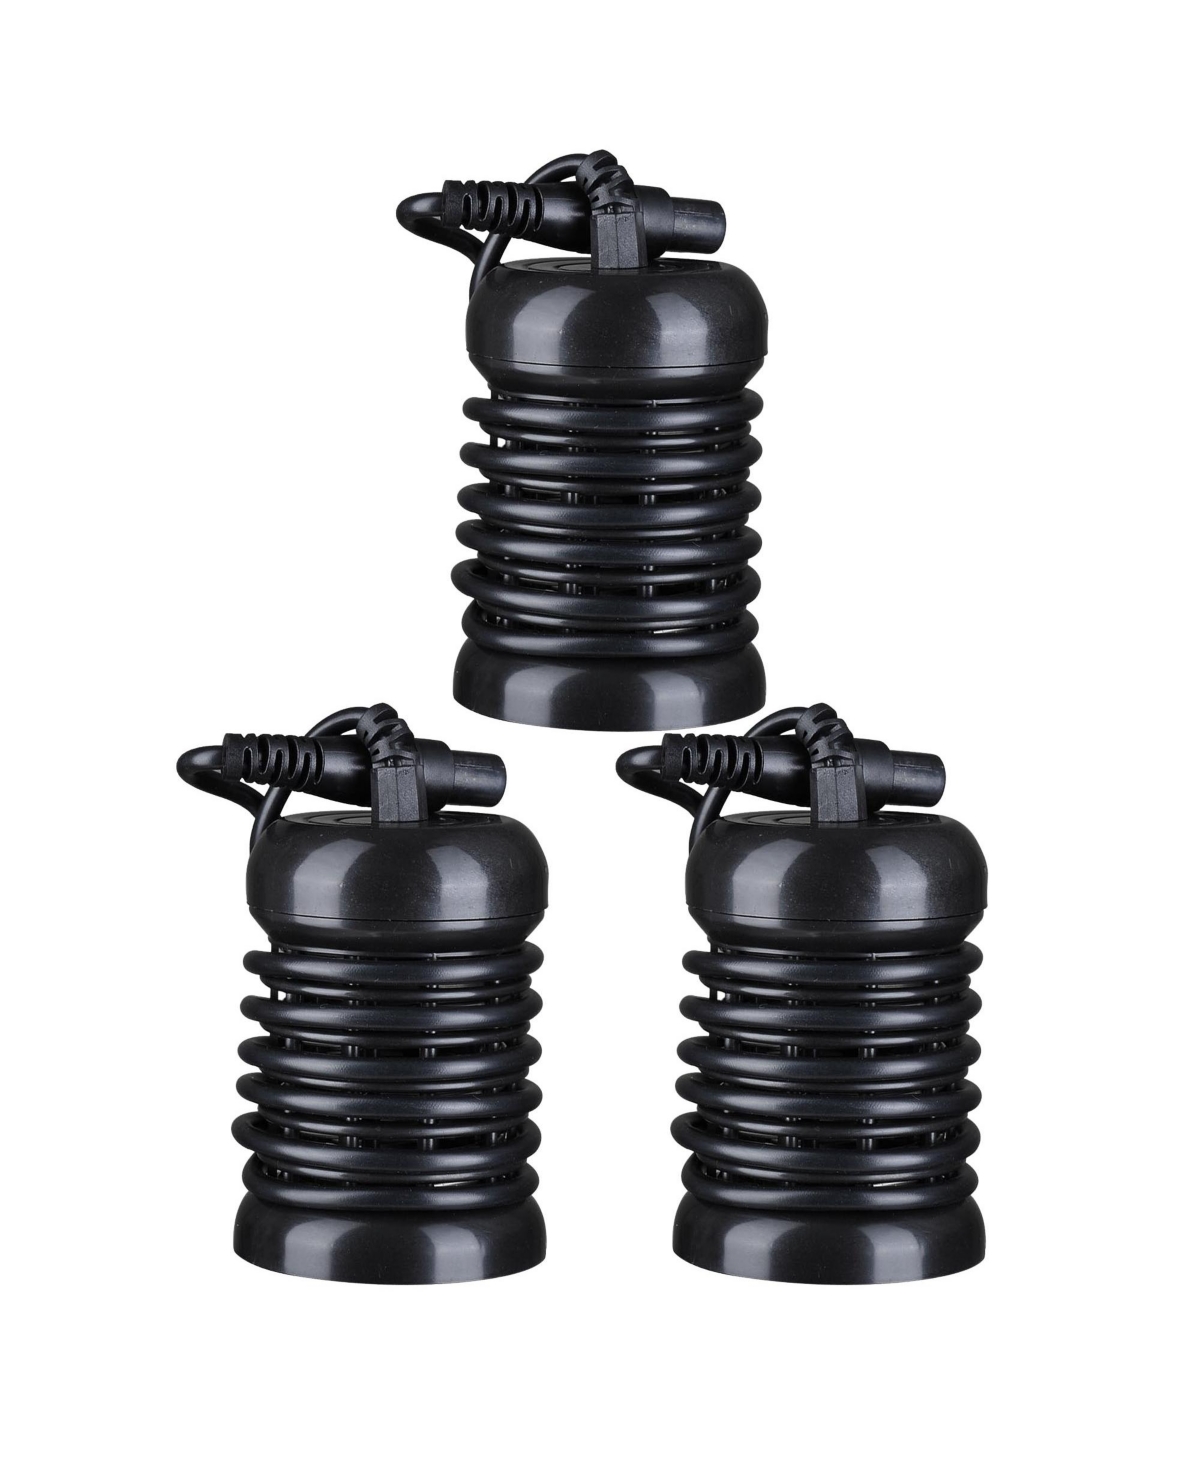 3 Pack Round Arrays for Ionic Detox Foot Bath Spa Cleanse Machine Replacement - Black